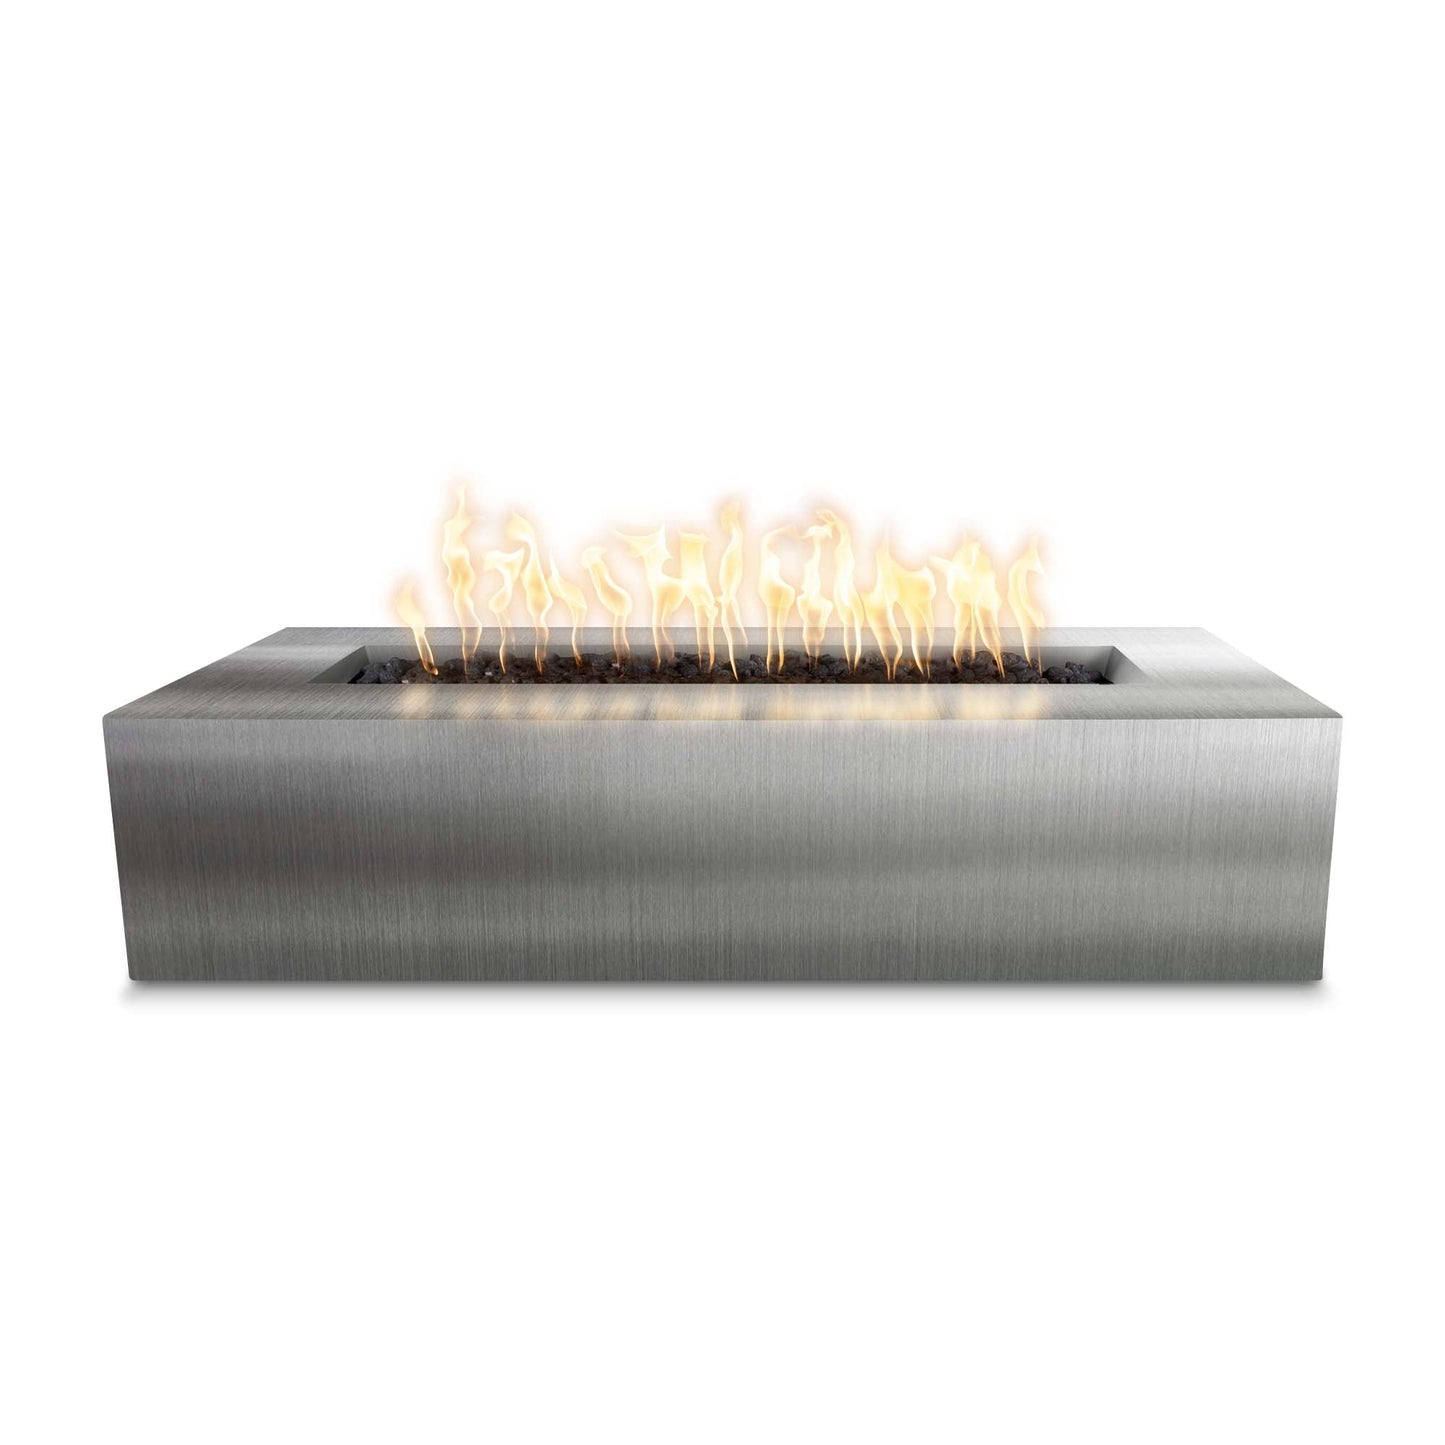 The Outdoor Plus Rectangular Regal 54" Stainless Steel Natural Gas Fire Pit with Match Lit Ignition